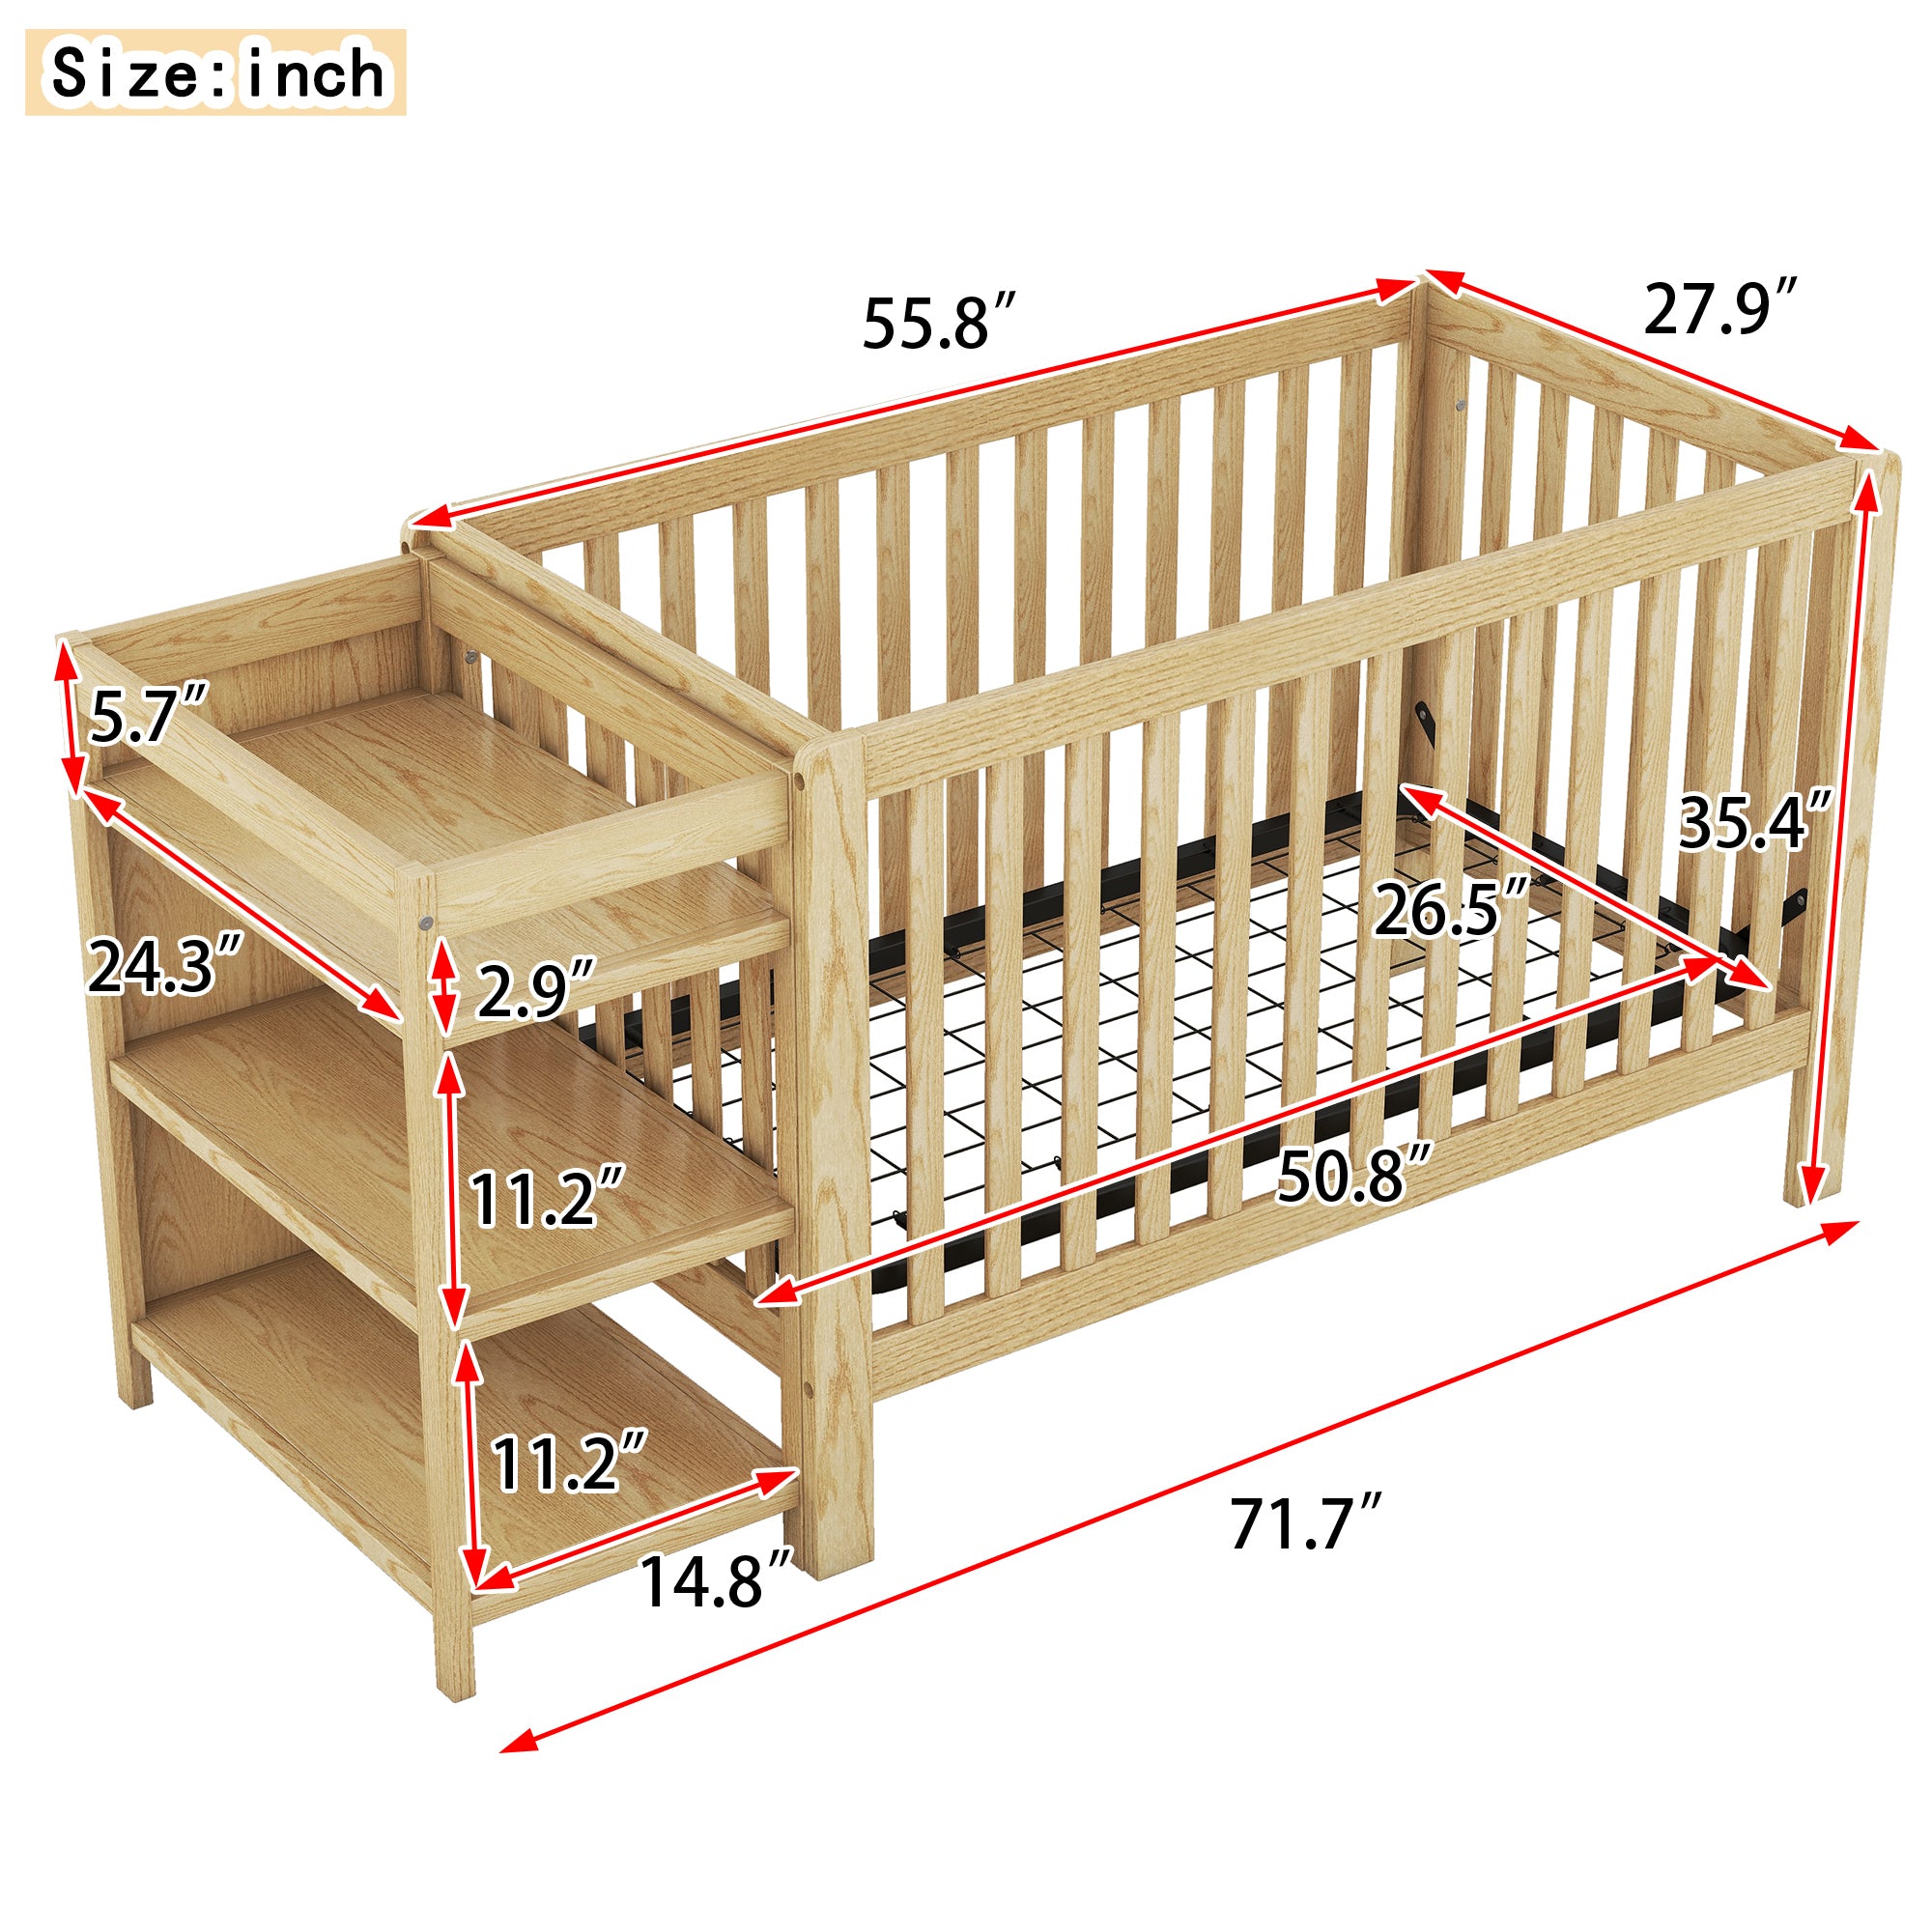 Convertible Crib/Full Size Bed with Changing Table - Natural